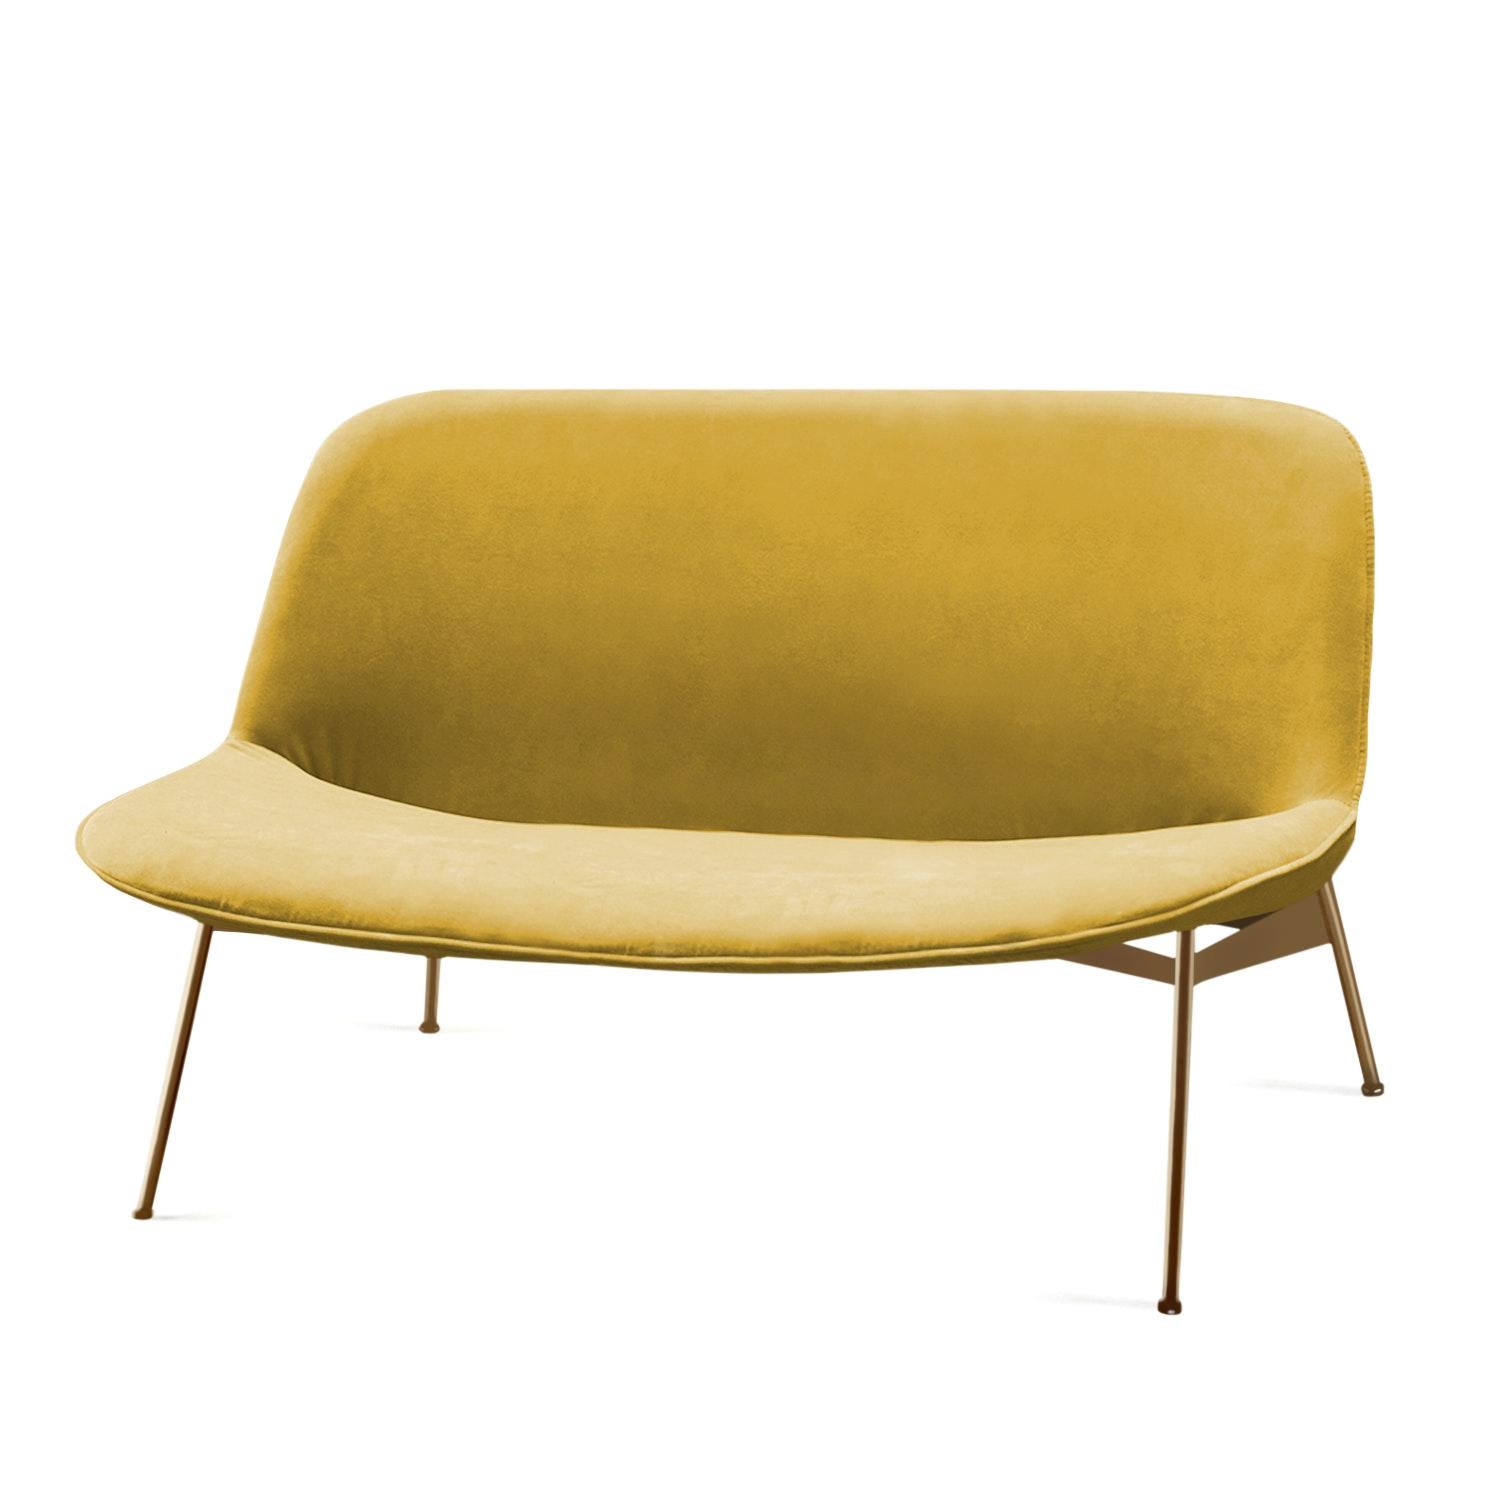 Chiado Sofa, Small with Corn and Gold For Sale